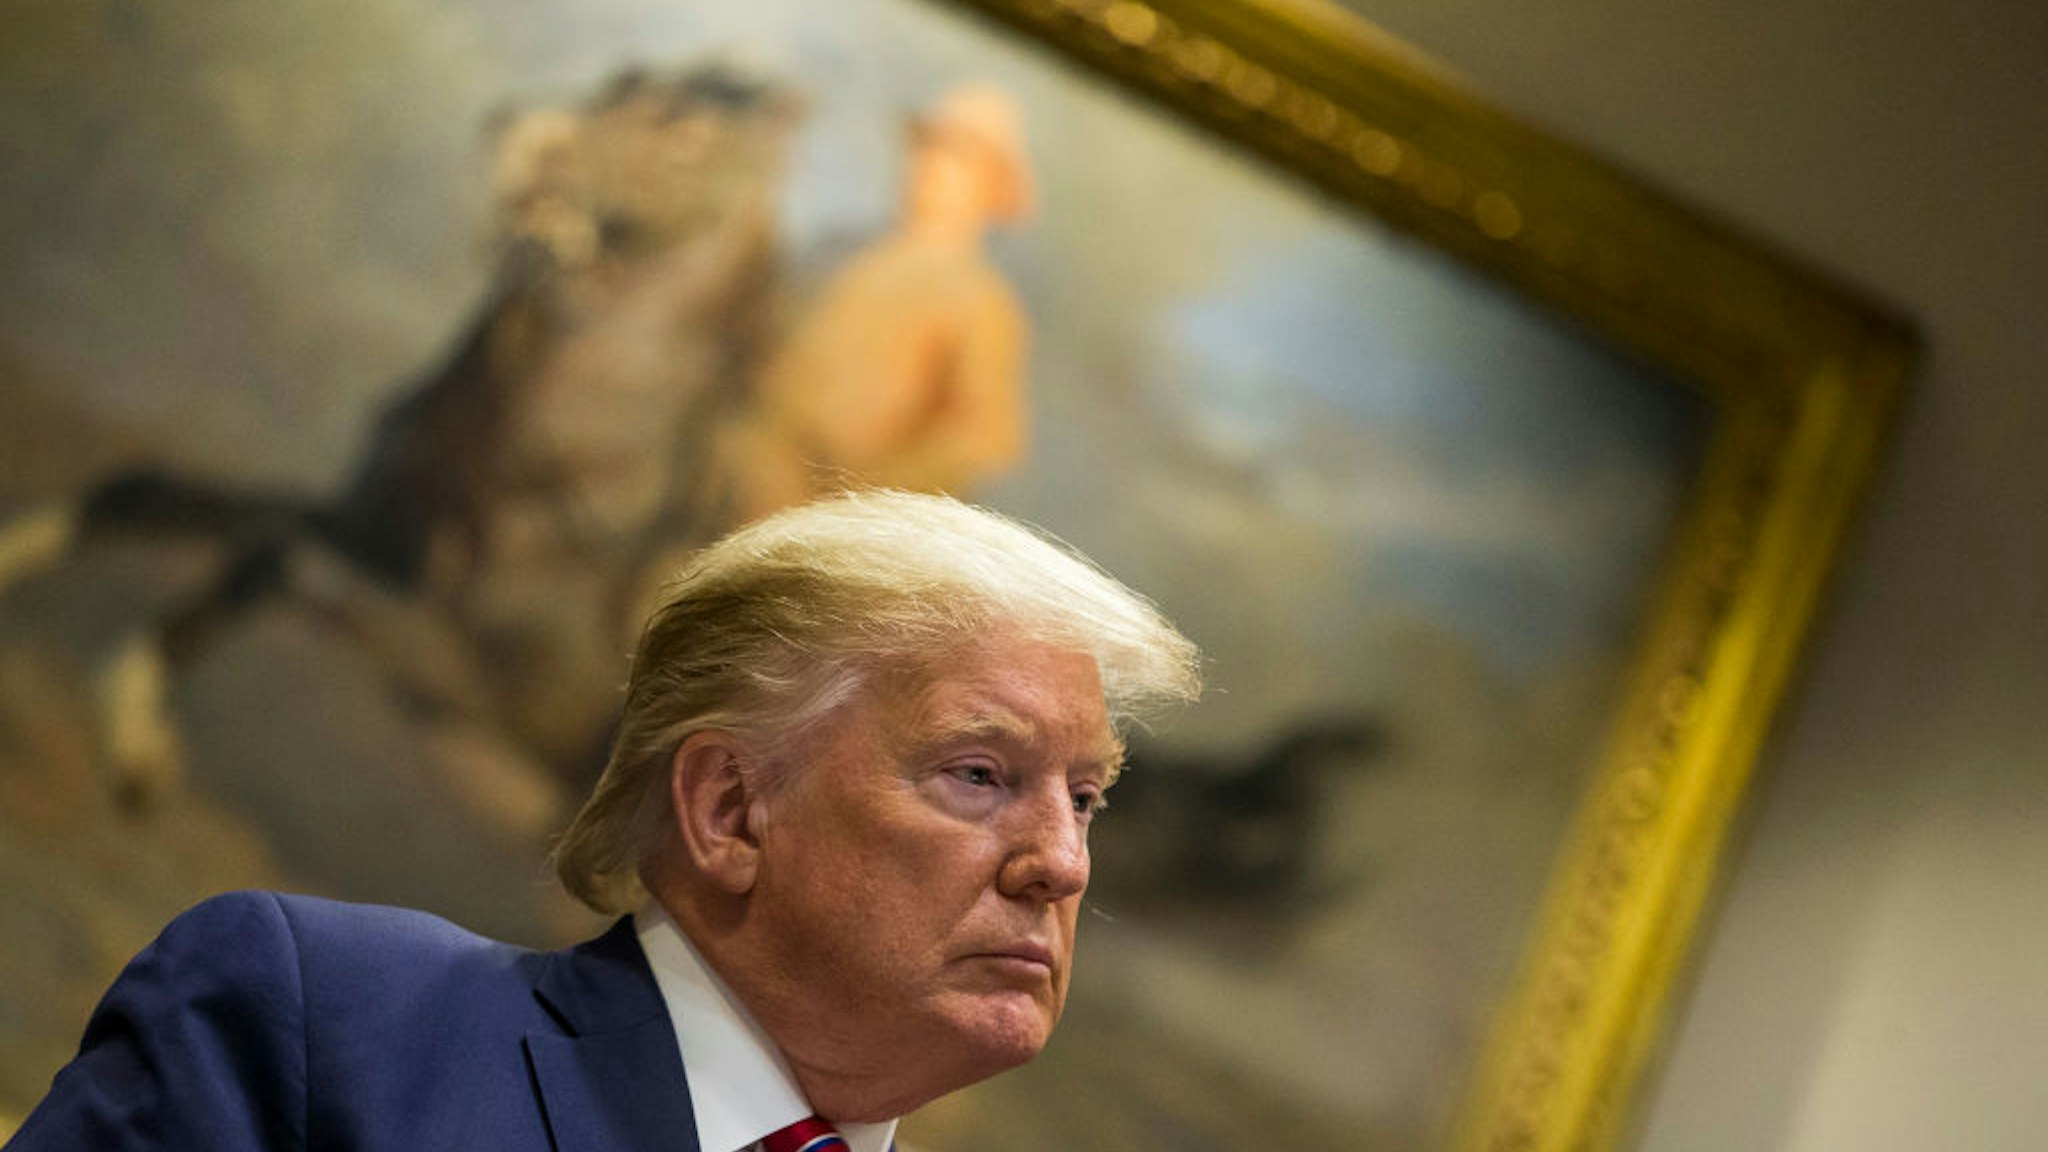 US President Donald Trump is pictured in the Roosevelt Room at the White House on November 15, 2019 in Washington, DC. President Trump discussed transparency in health care prices..